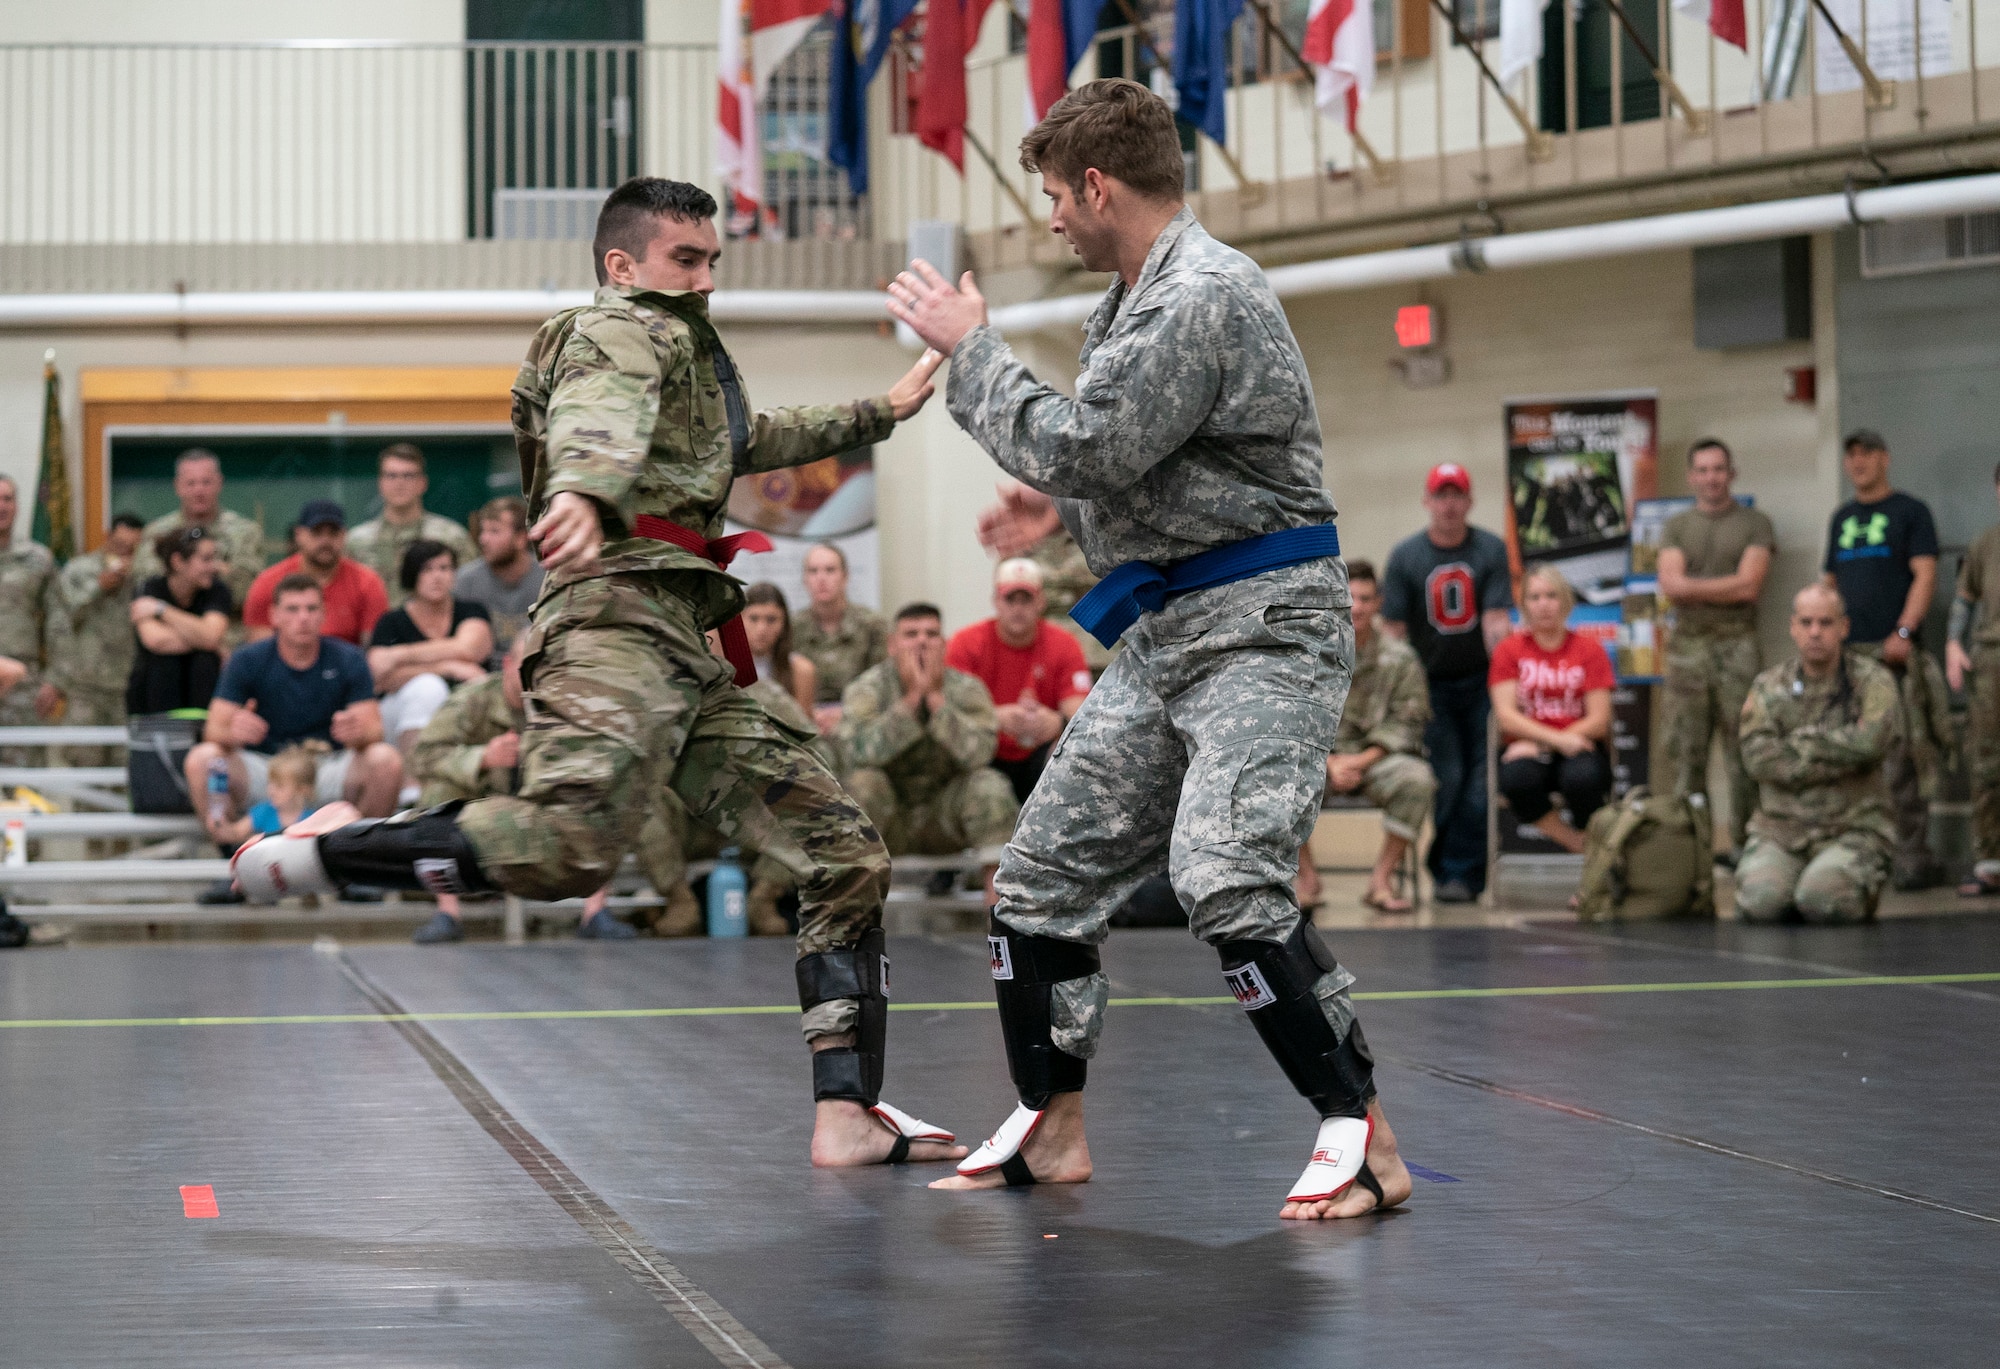 Participants compete in the 2019 Ohio Army National Guard Combatives Tournament Sept. 14, 2019, the Maj. Gen. Robert S. Beightler Armory in Columbus, Ohio. More than 65 Ohio Guard members competed in the double-elimination tournament, in its sixth year.